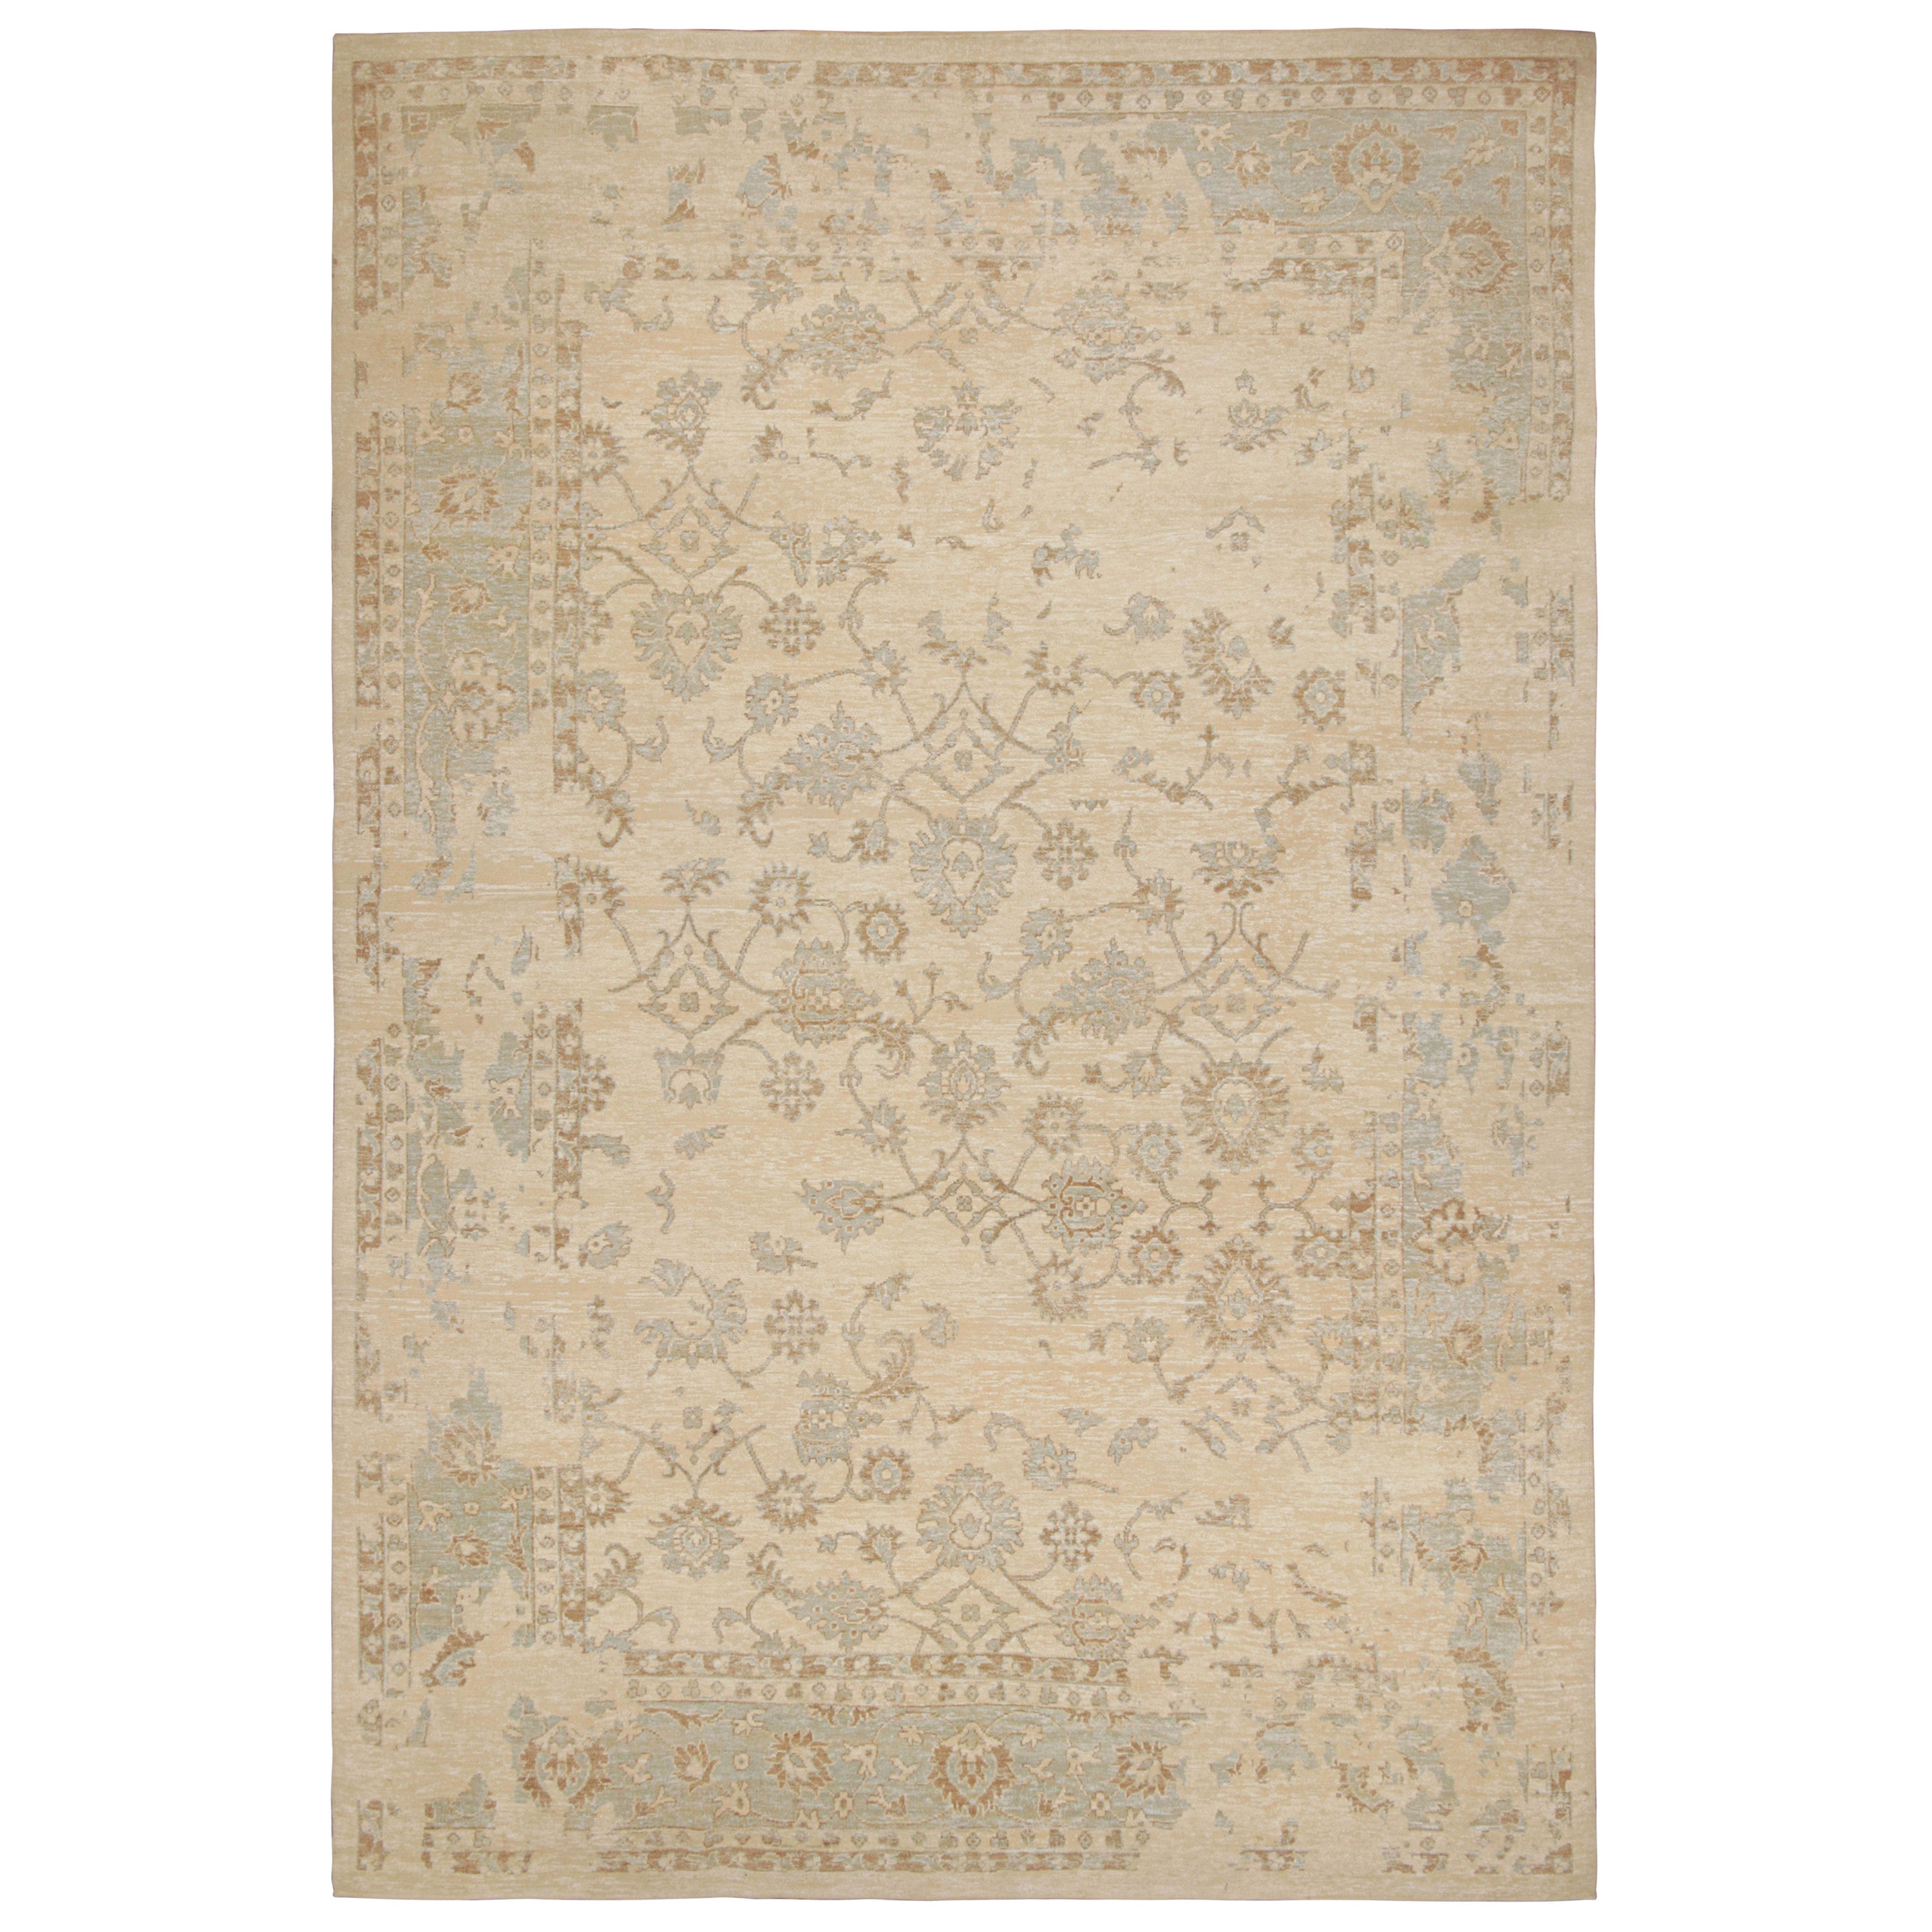 Rug & Kilim’s Oushak Style Oversized Rug in Beige/Brown, With Floral Patterns For Sale